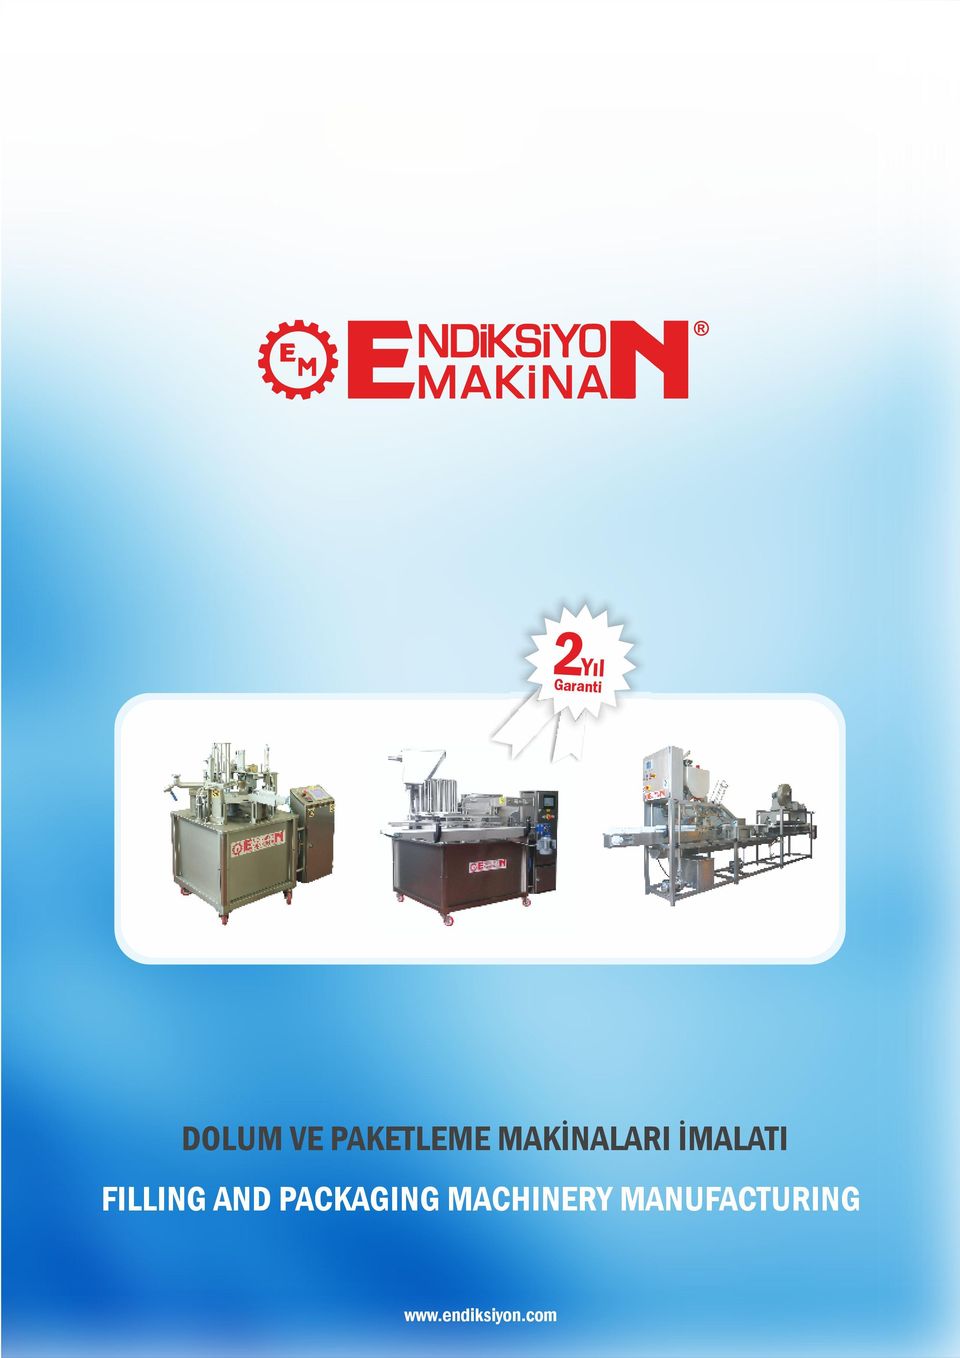 AND PACKAGING MACHINERY